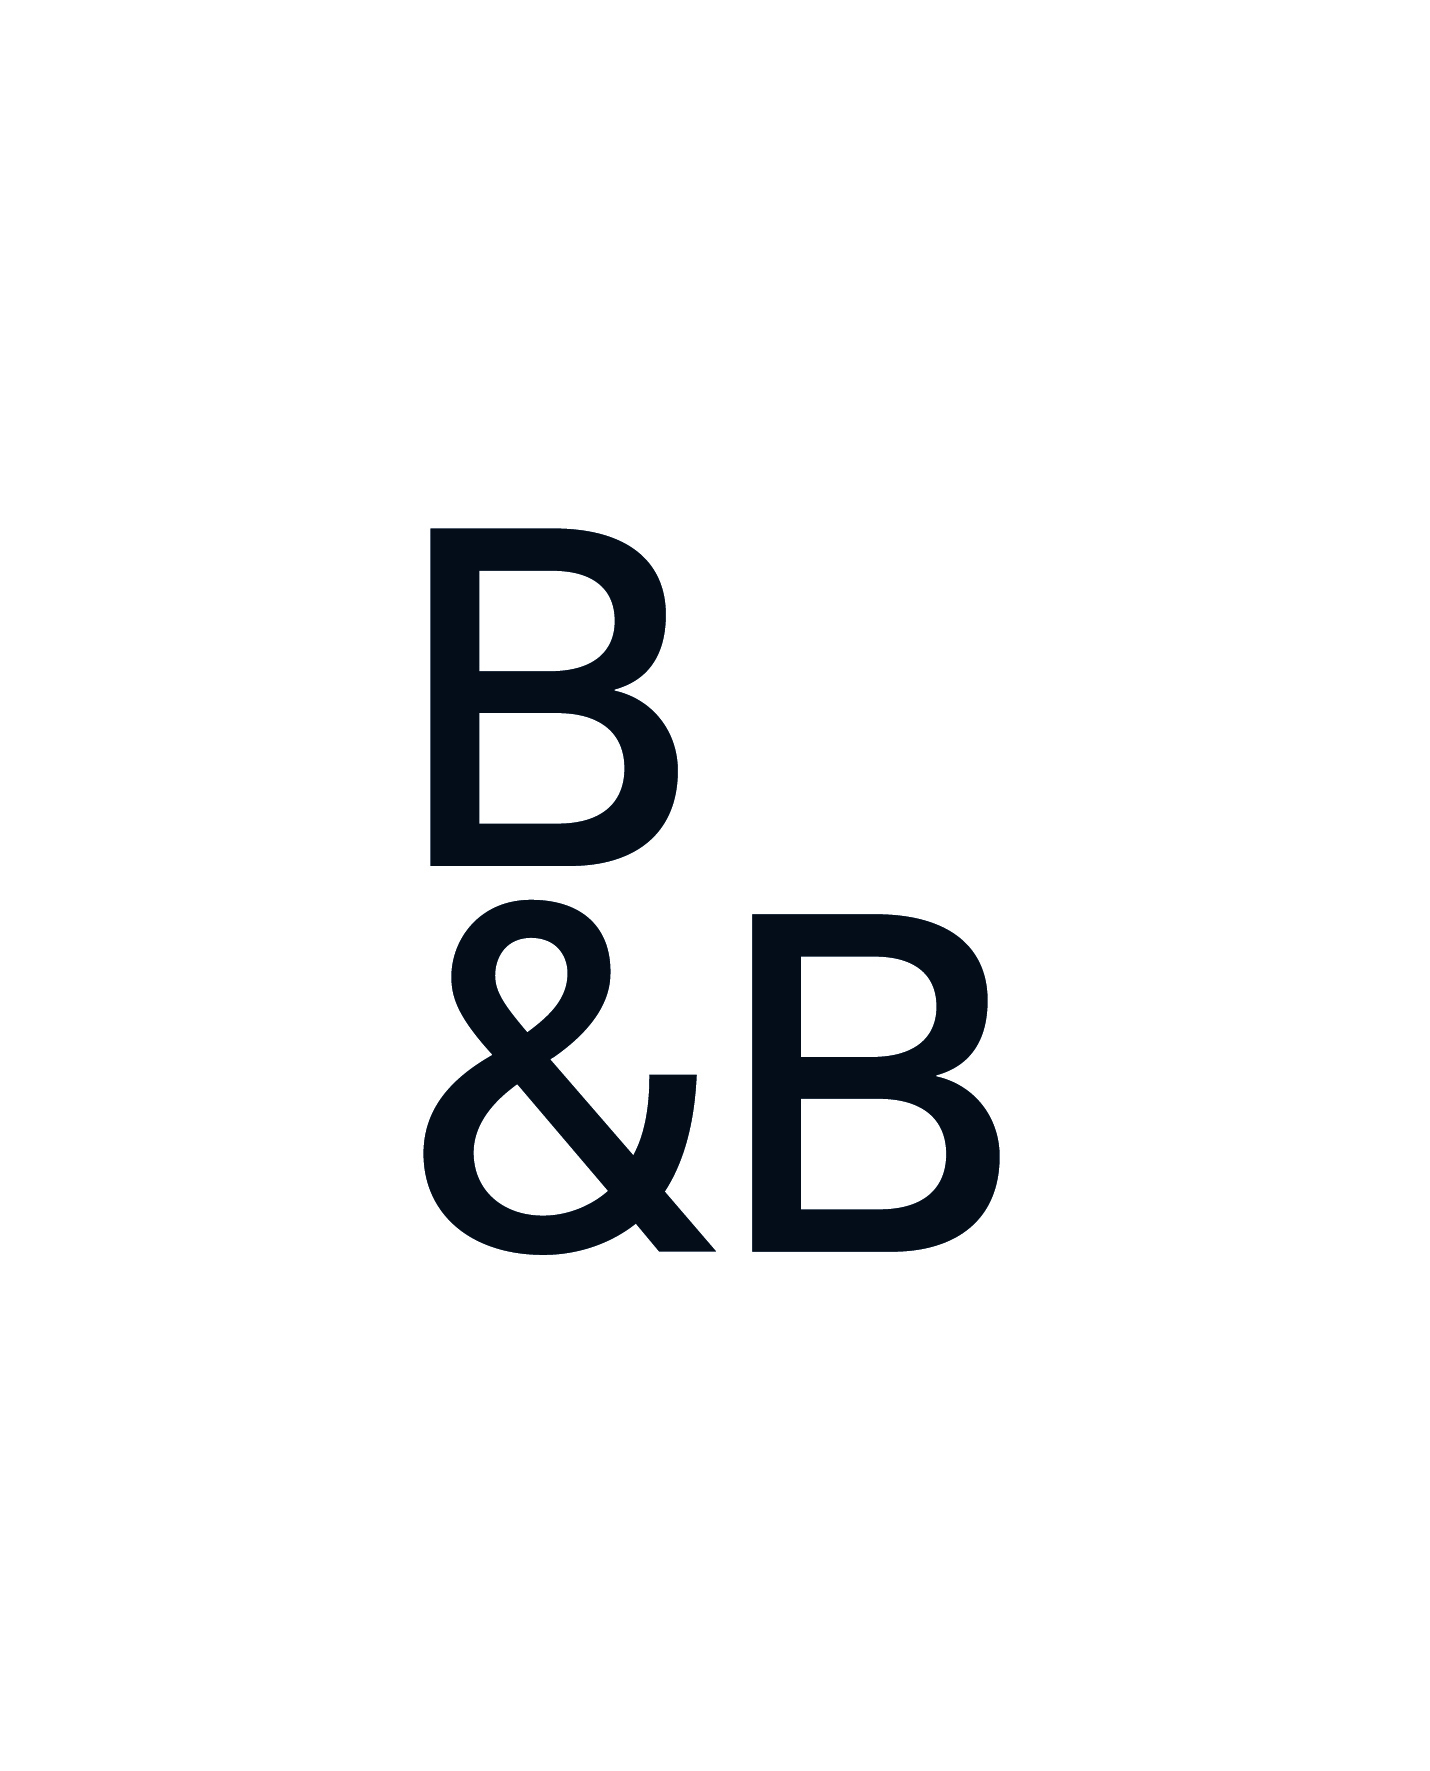 Brown &amp; Brown Architects